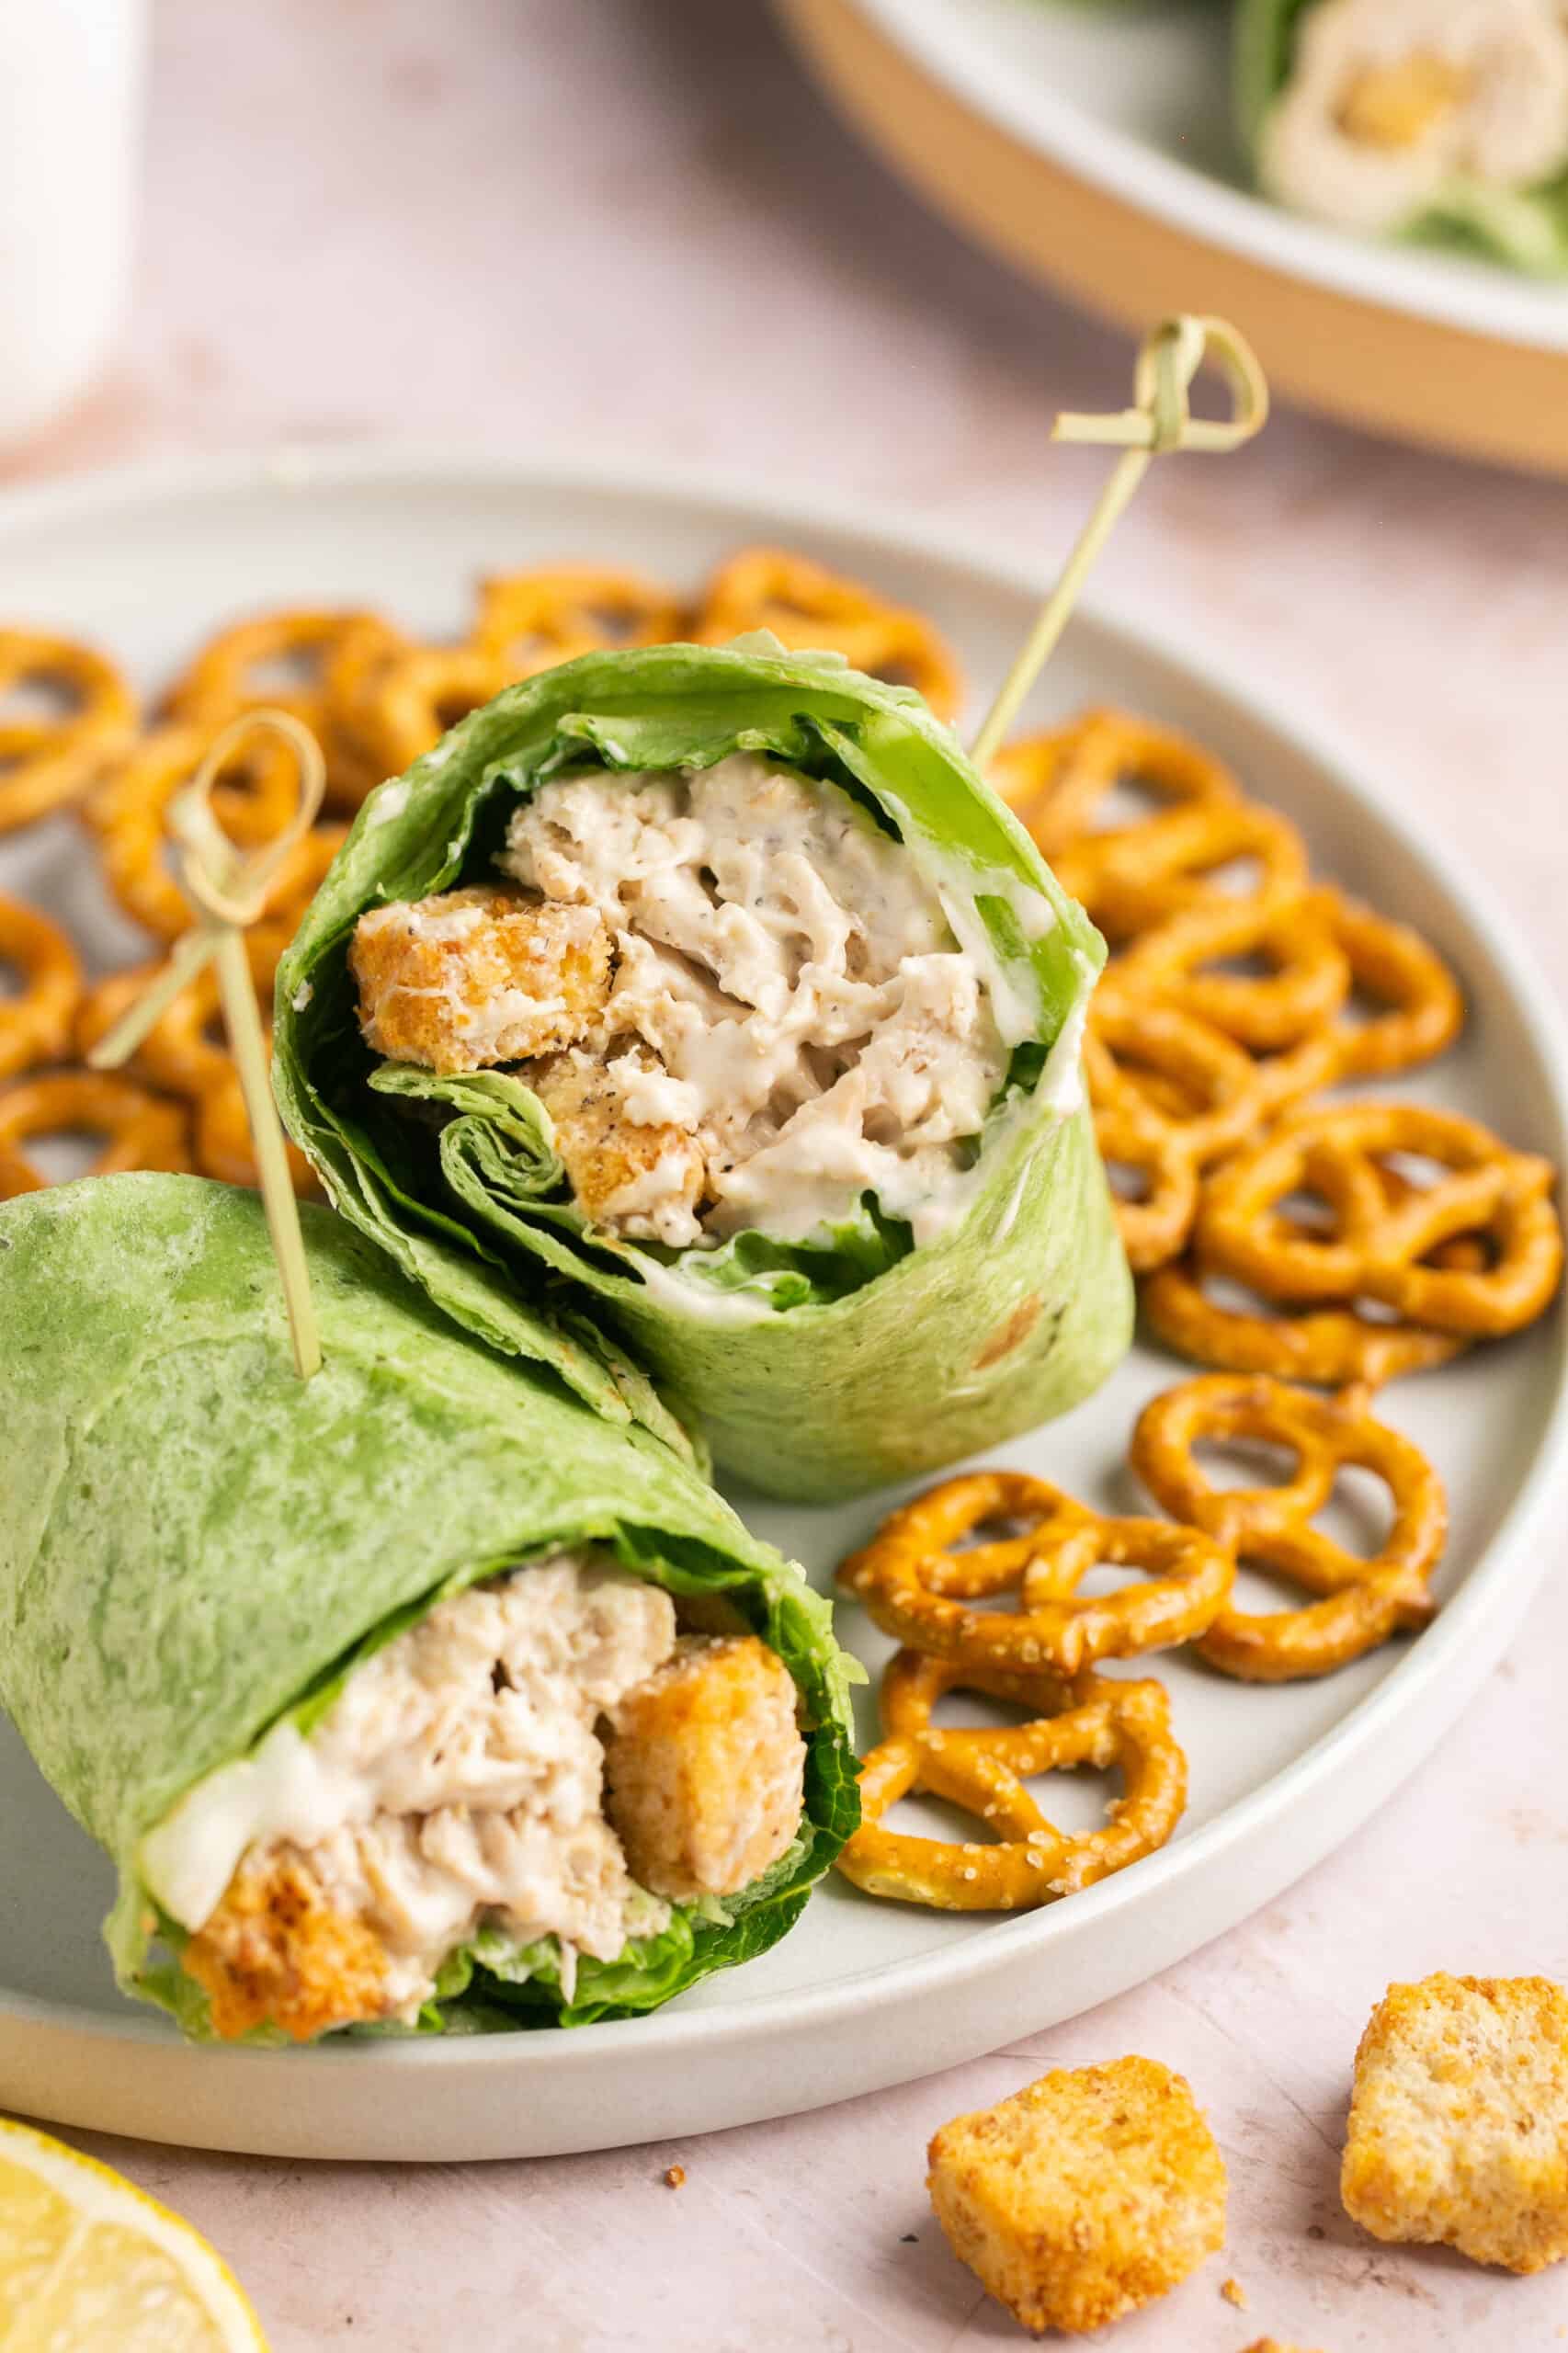 Healthy chicken caesar wrap cut in half on a plate with a side of pretzels.